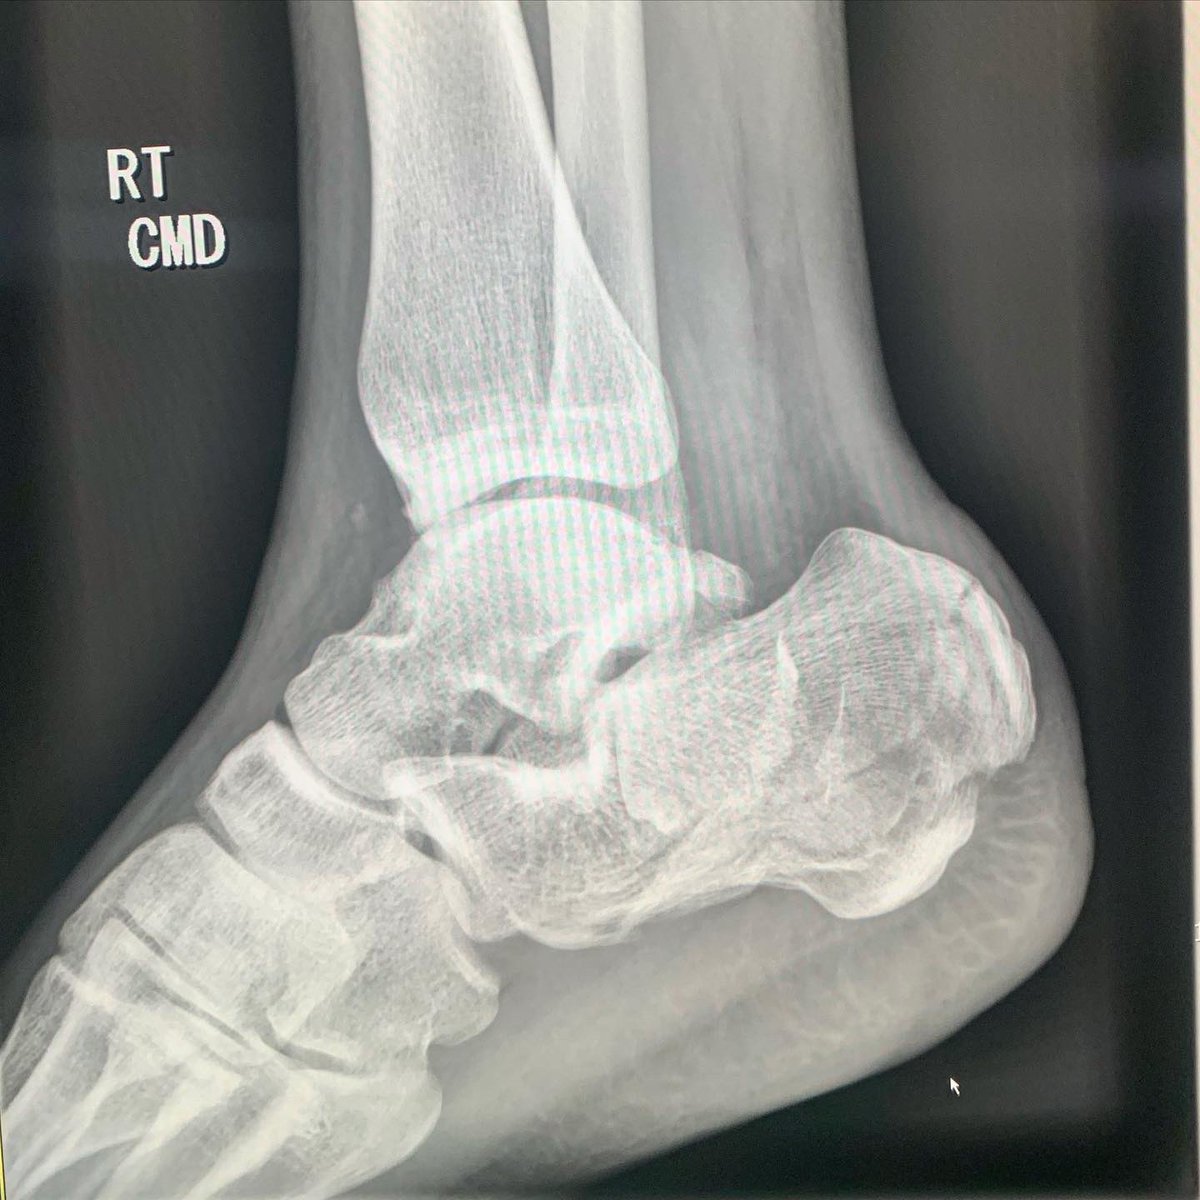 Case Report: Concurrent Sustentaculum Tali and Lateral Talar Body Fracture  in a 19 Year Old Patient